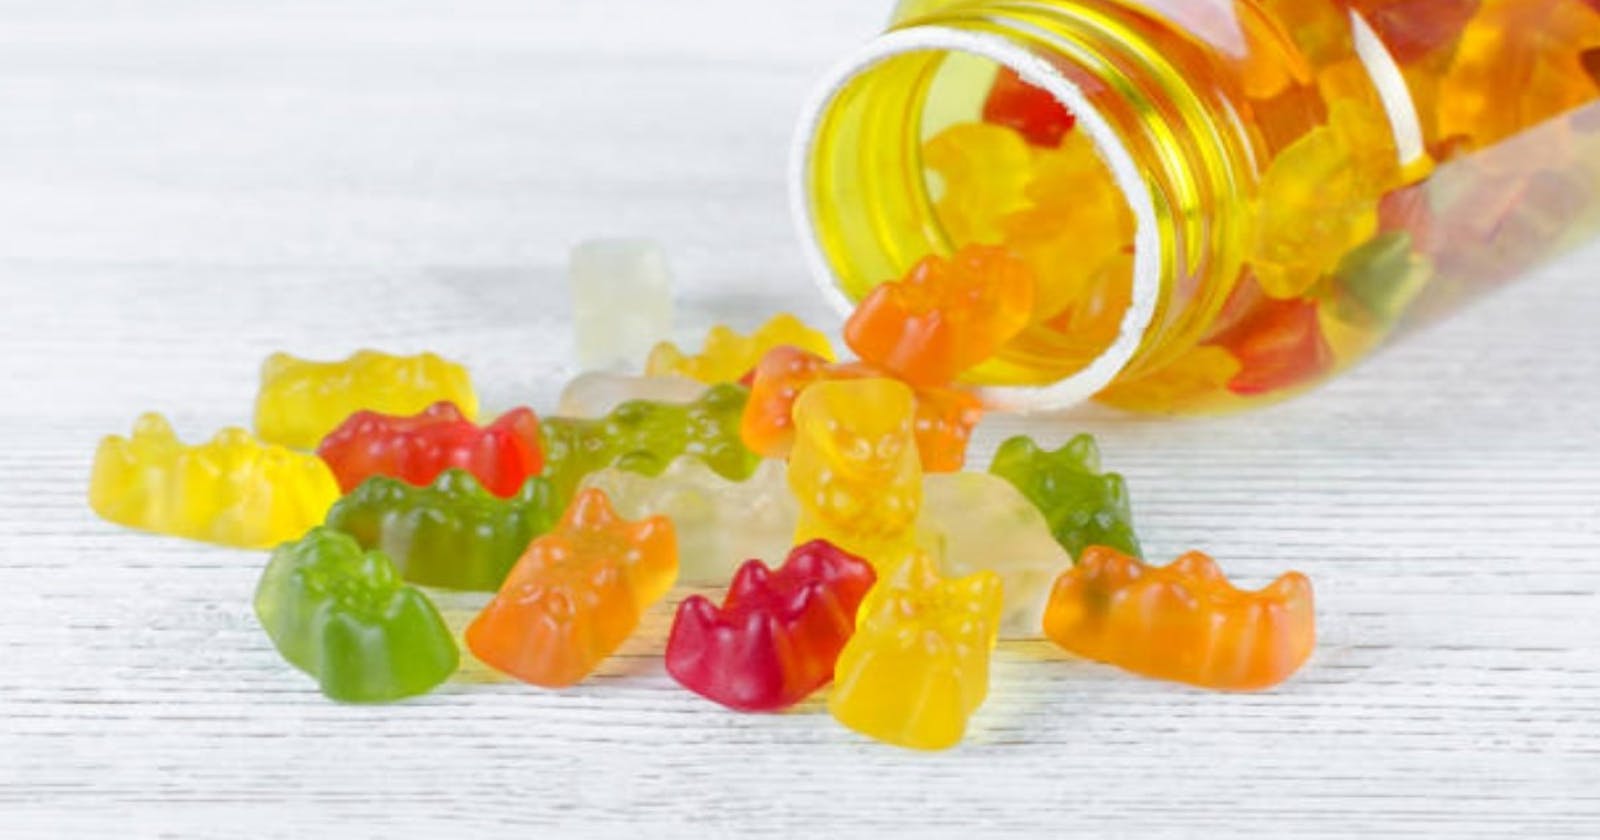 Super Health CBD Gummies– [REAL OR HOAX] Does it Really Works?